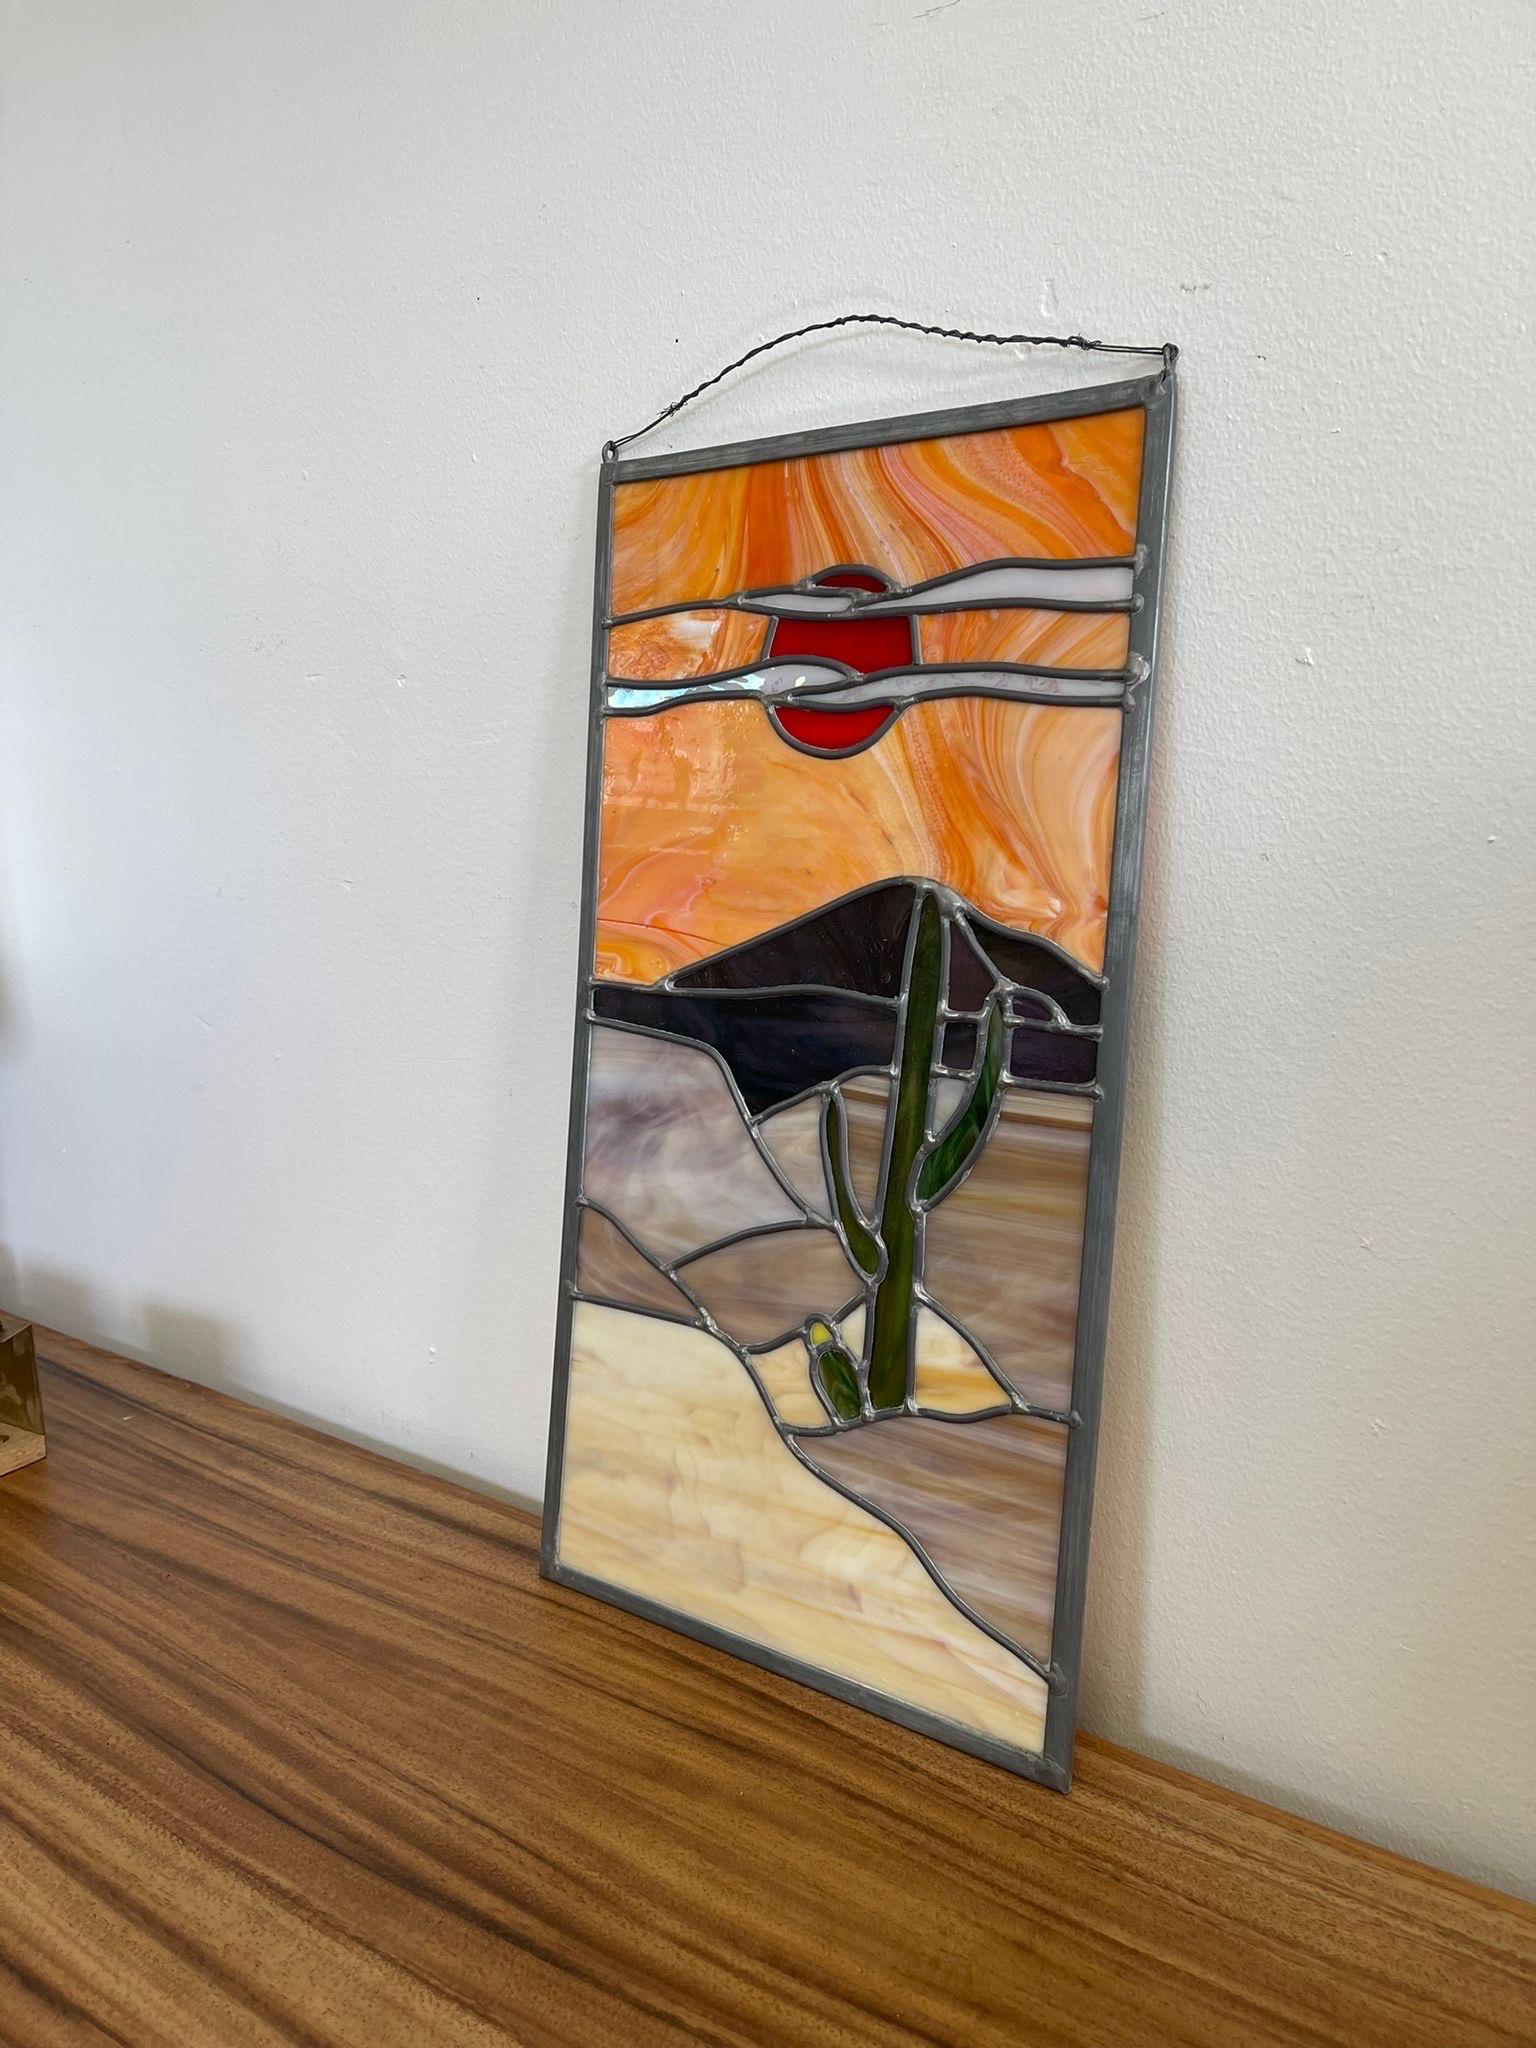 This Vintage stained glass piece has vibrant coloring and a retro feel. The orange sky and sand have a marbled effect to it. Silver Toned metal detailing and framing. Vintage Condition Consistent with Age as Pictured.

Dimensions. 11 W ; 1/2 D ; 21 H